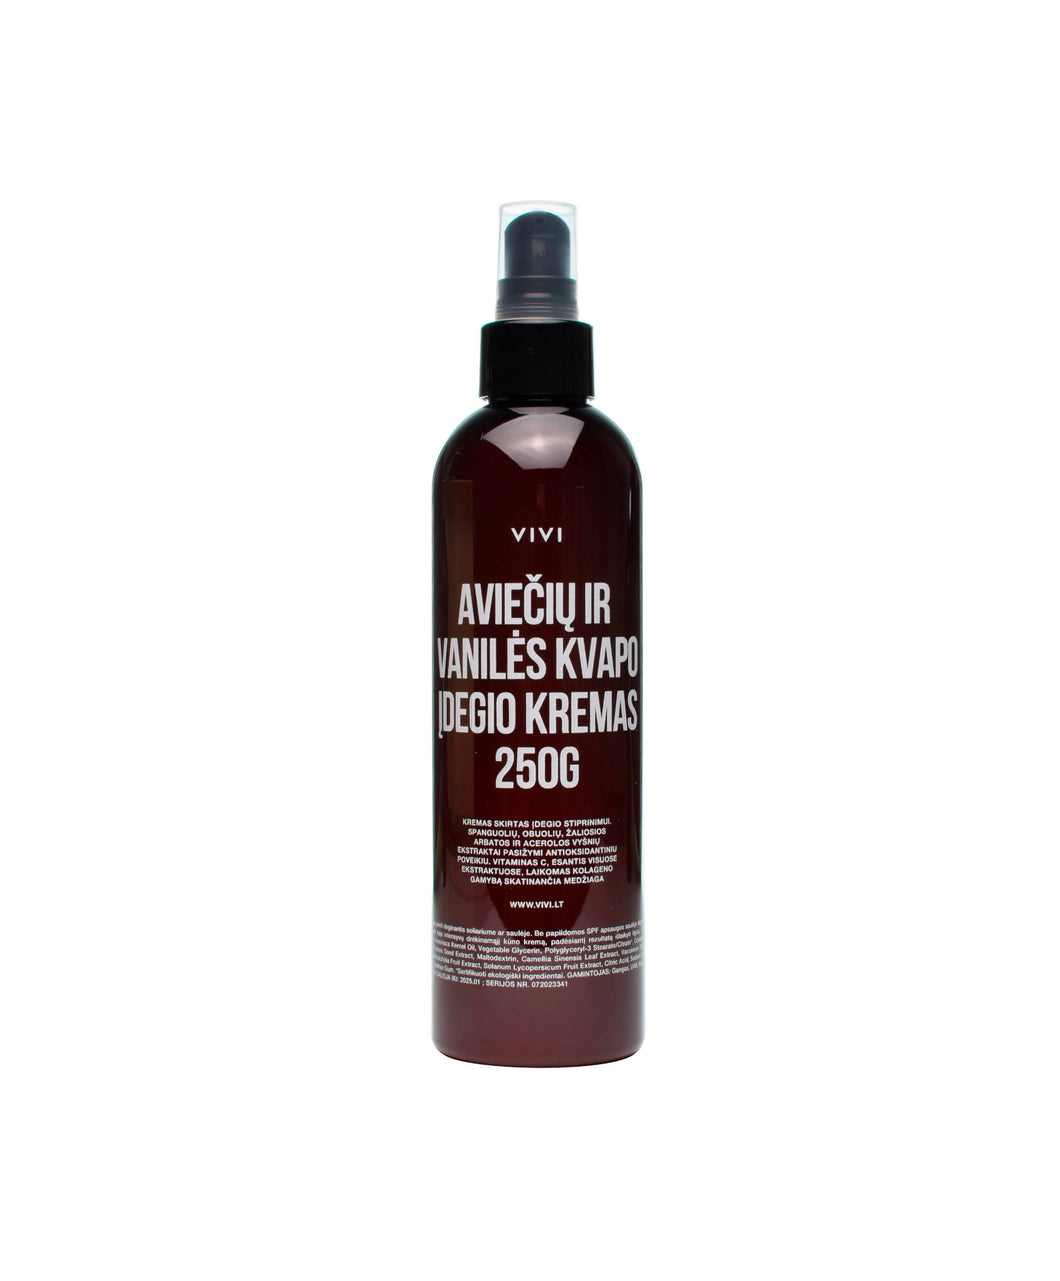 Tanning cream with raspberry and vanilla scent, 250g